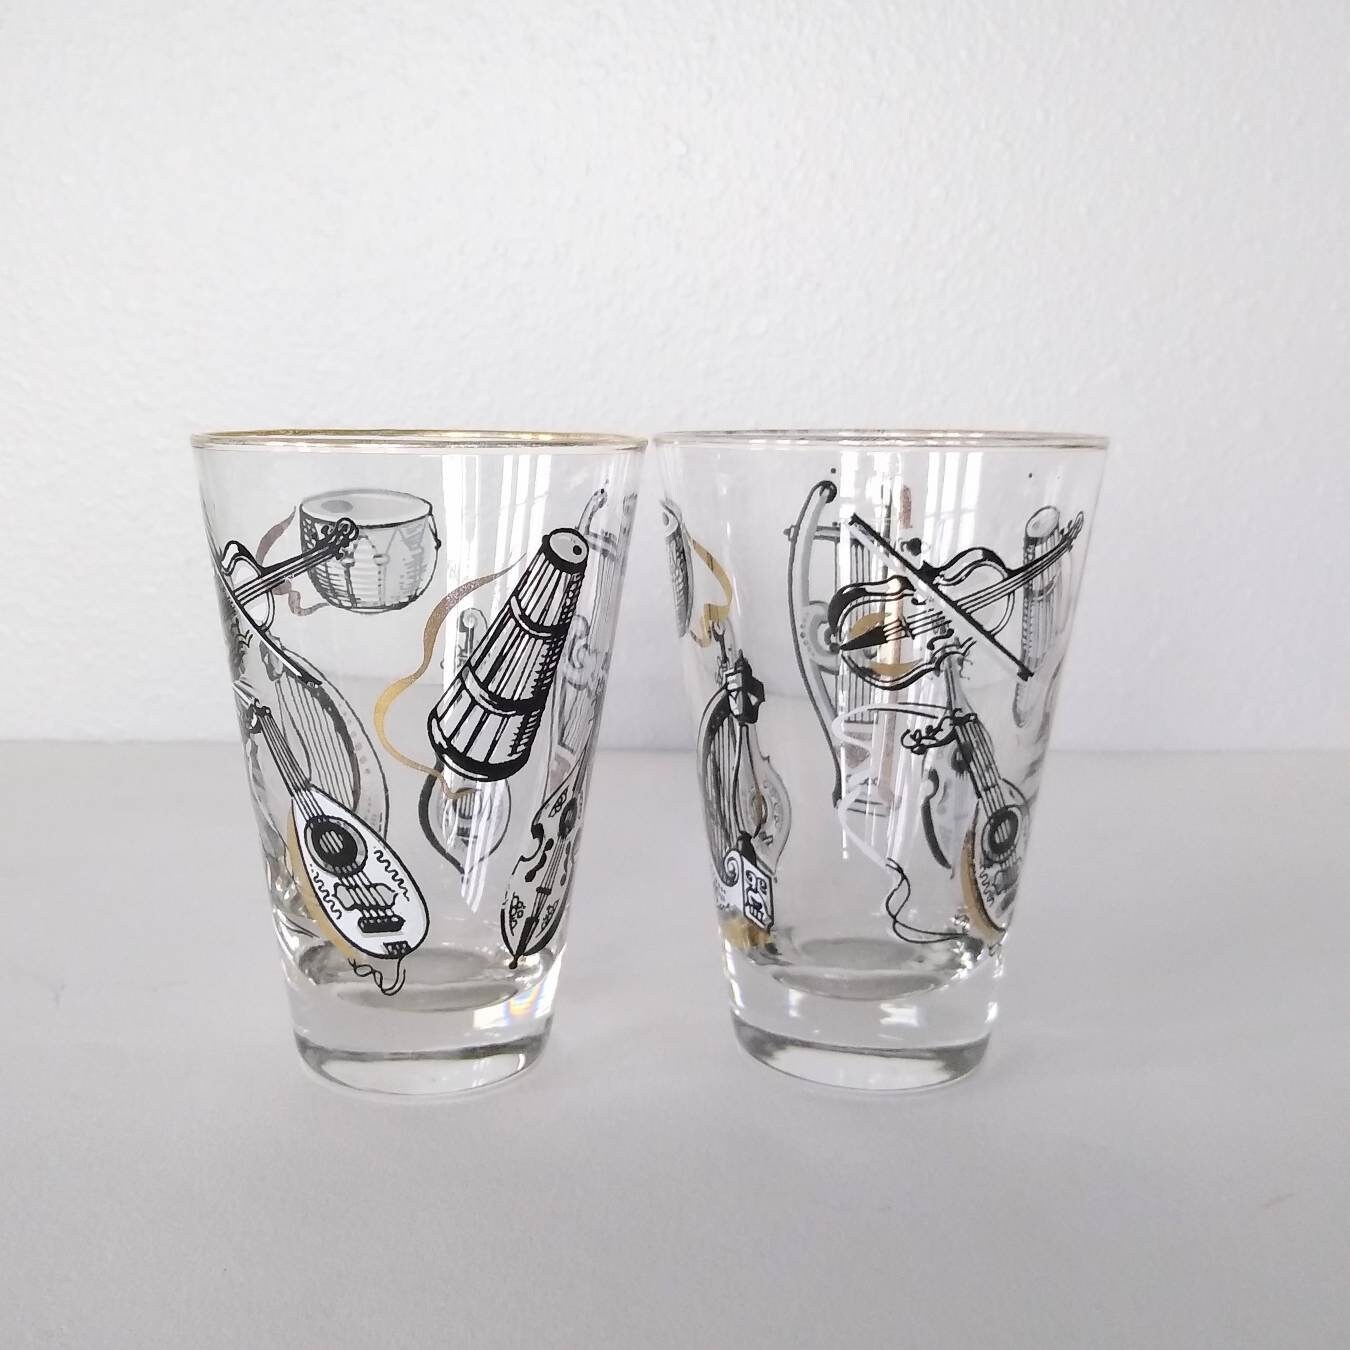 Vintage Art Deco 1920s Highball Cocktail Glasses | Set of 4 | 14 oz Tall  Crystal Tumblers for Drinki…See more Vintage Art Deco 1920s Highball  Cocktail